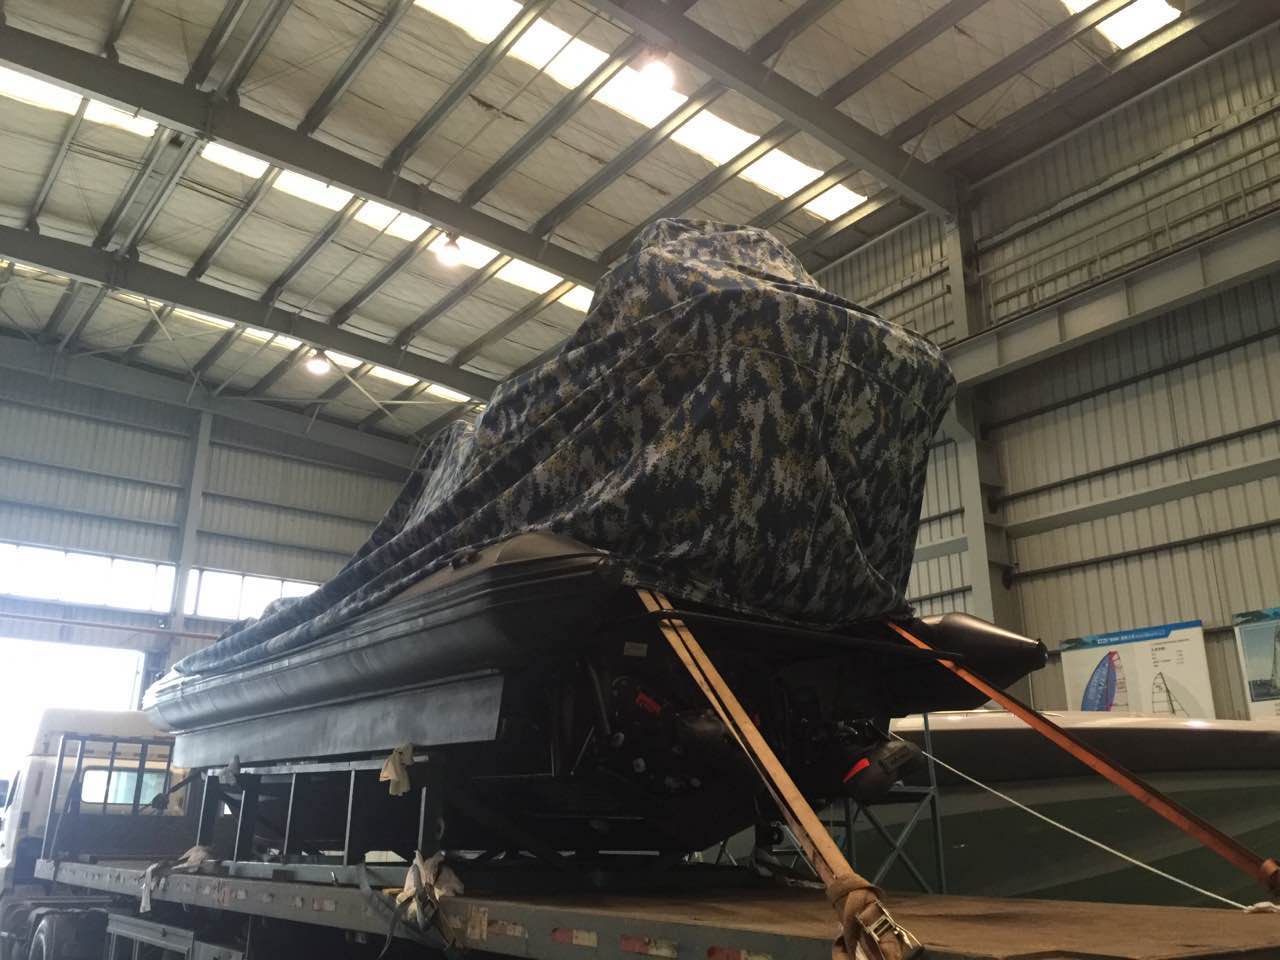 Ship cover,boat cover,waterproof cover,camouflage covers